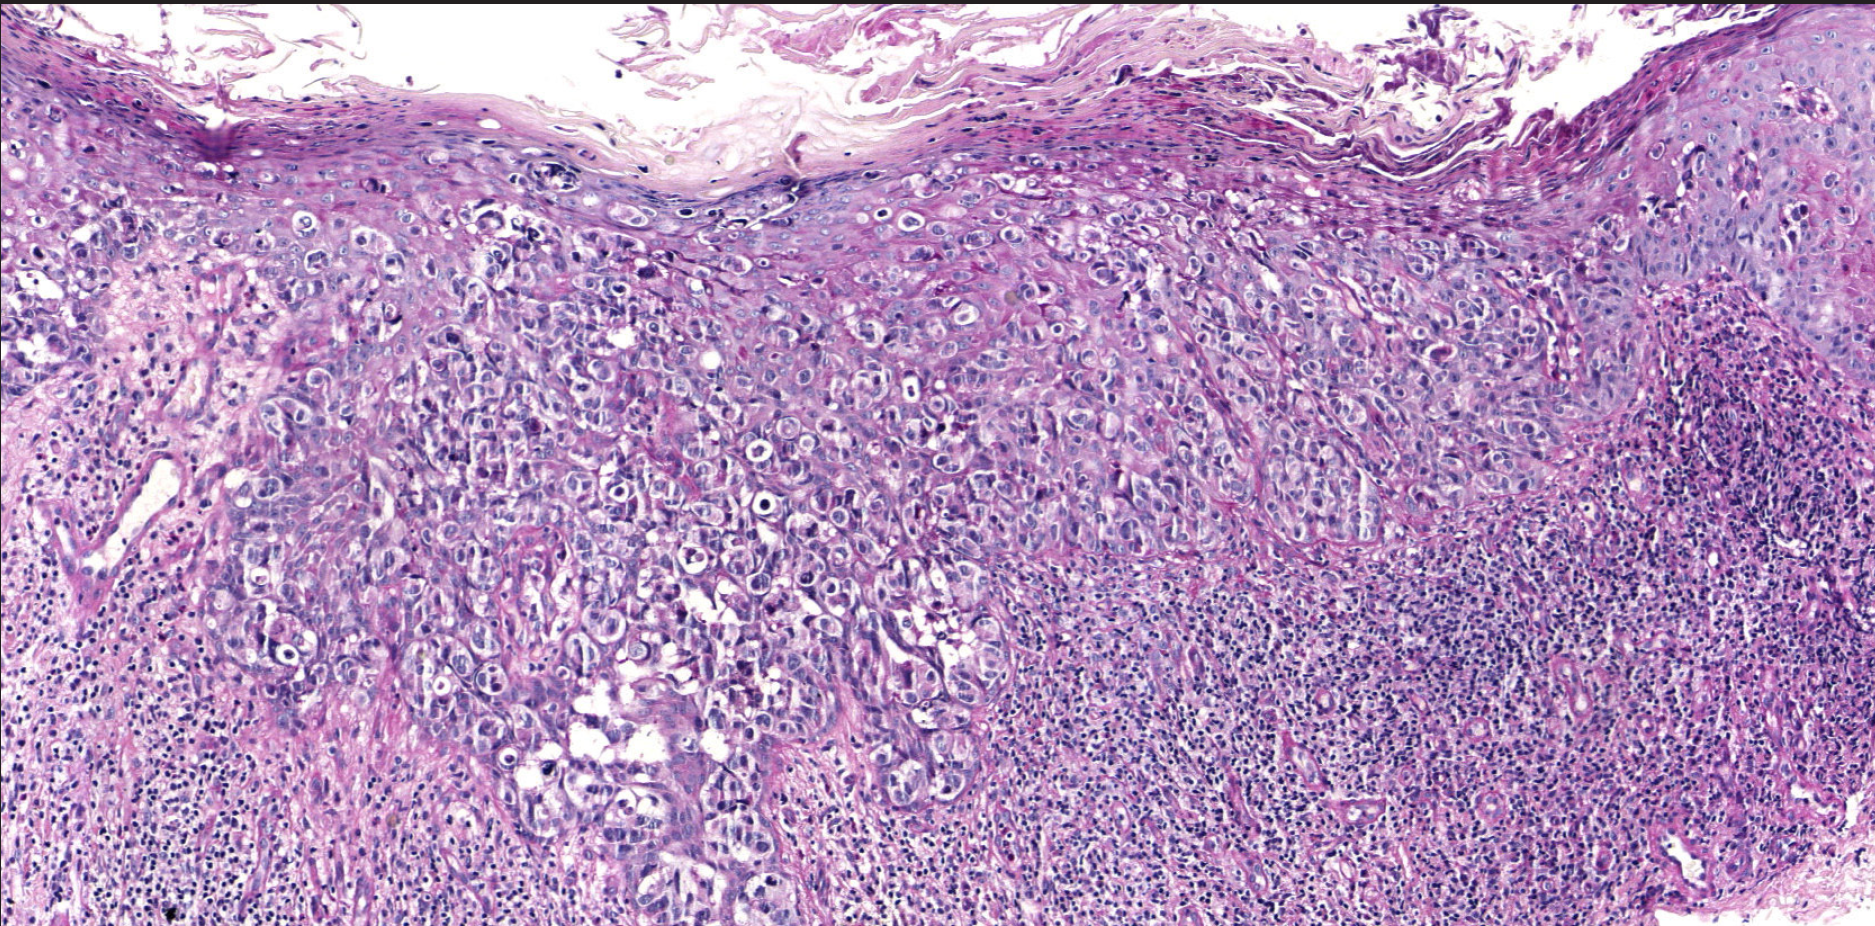 Permeation of the epidermis by tumour cells with vesicular nuclei, visible nucleoli and large vacuolated cytoplasm. In the superficial dermis there was an intense inflammatory infiltrate (haematoxylin and eosin stain, x100).